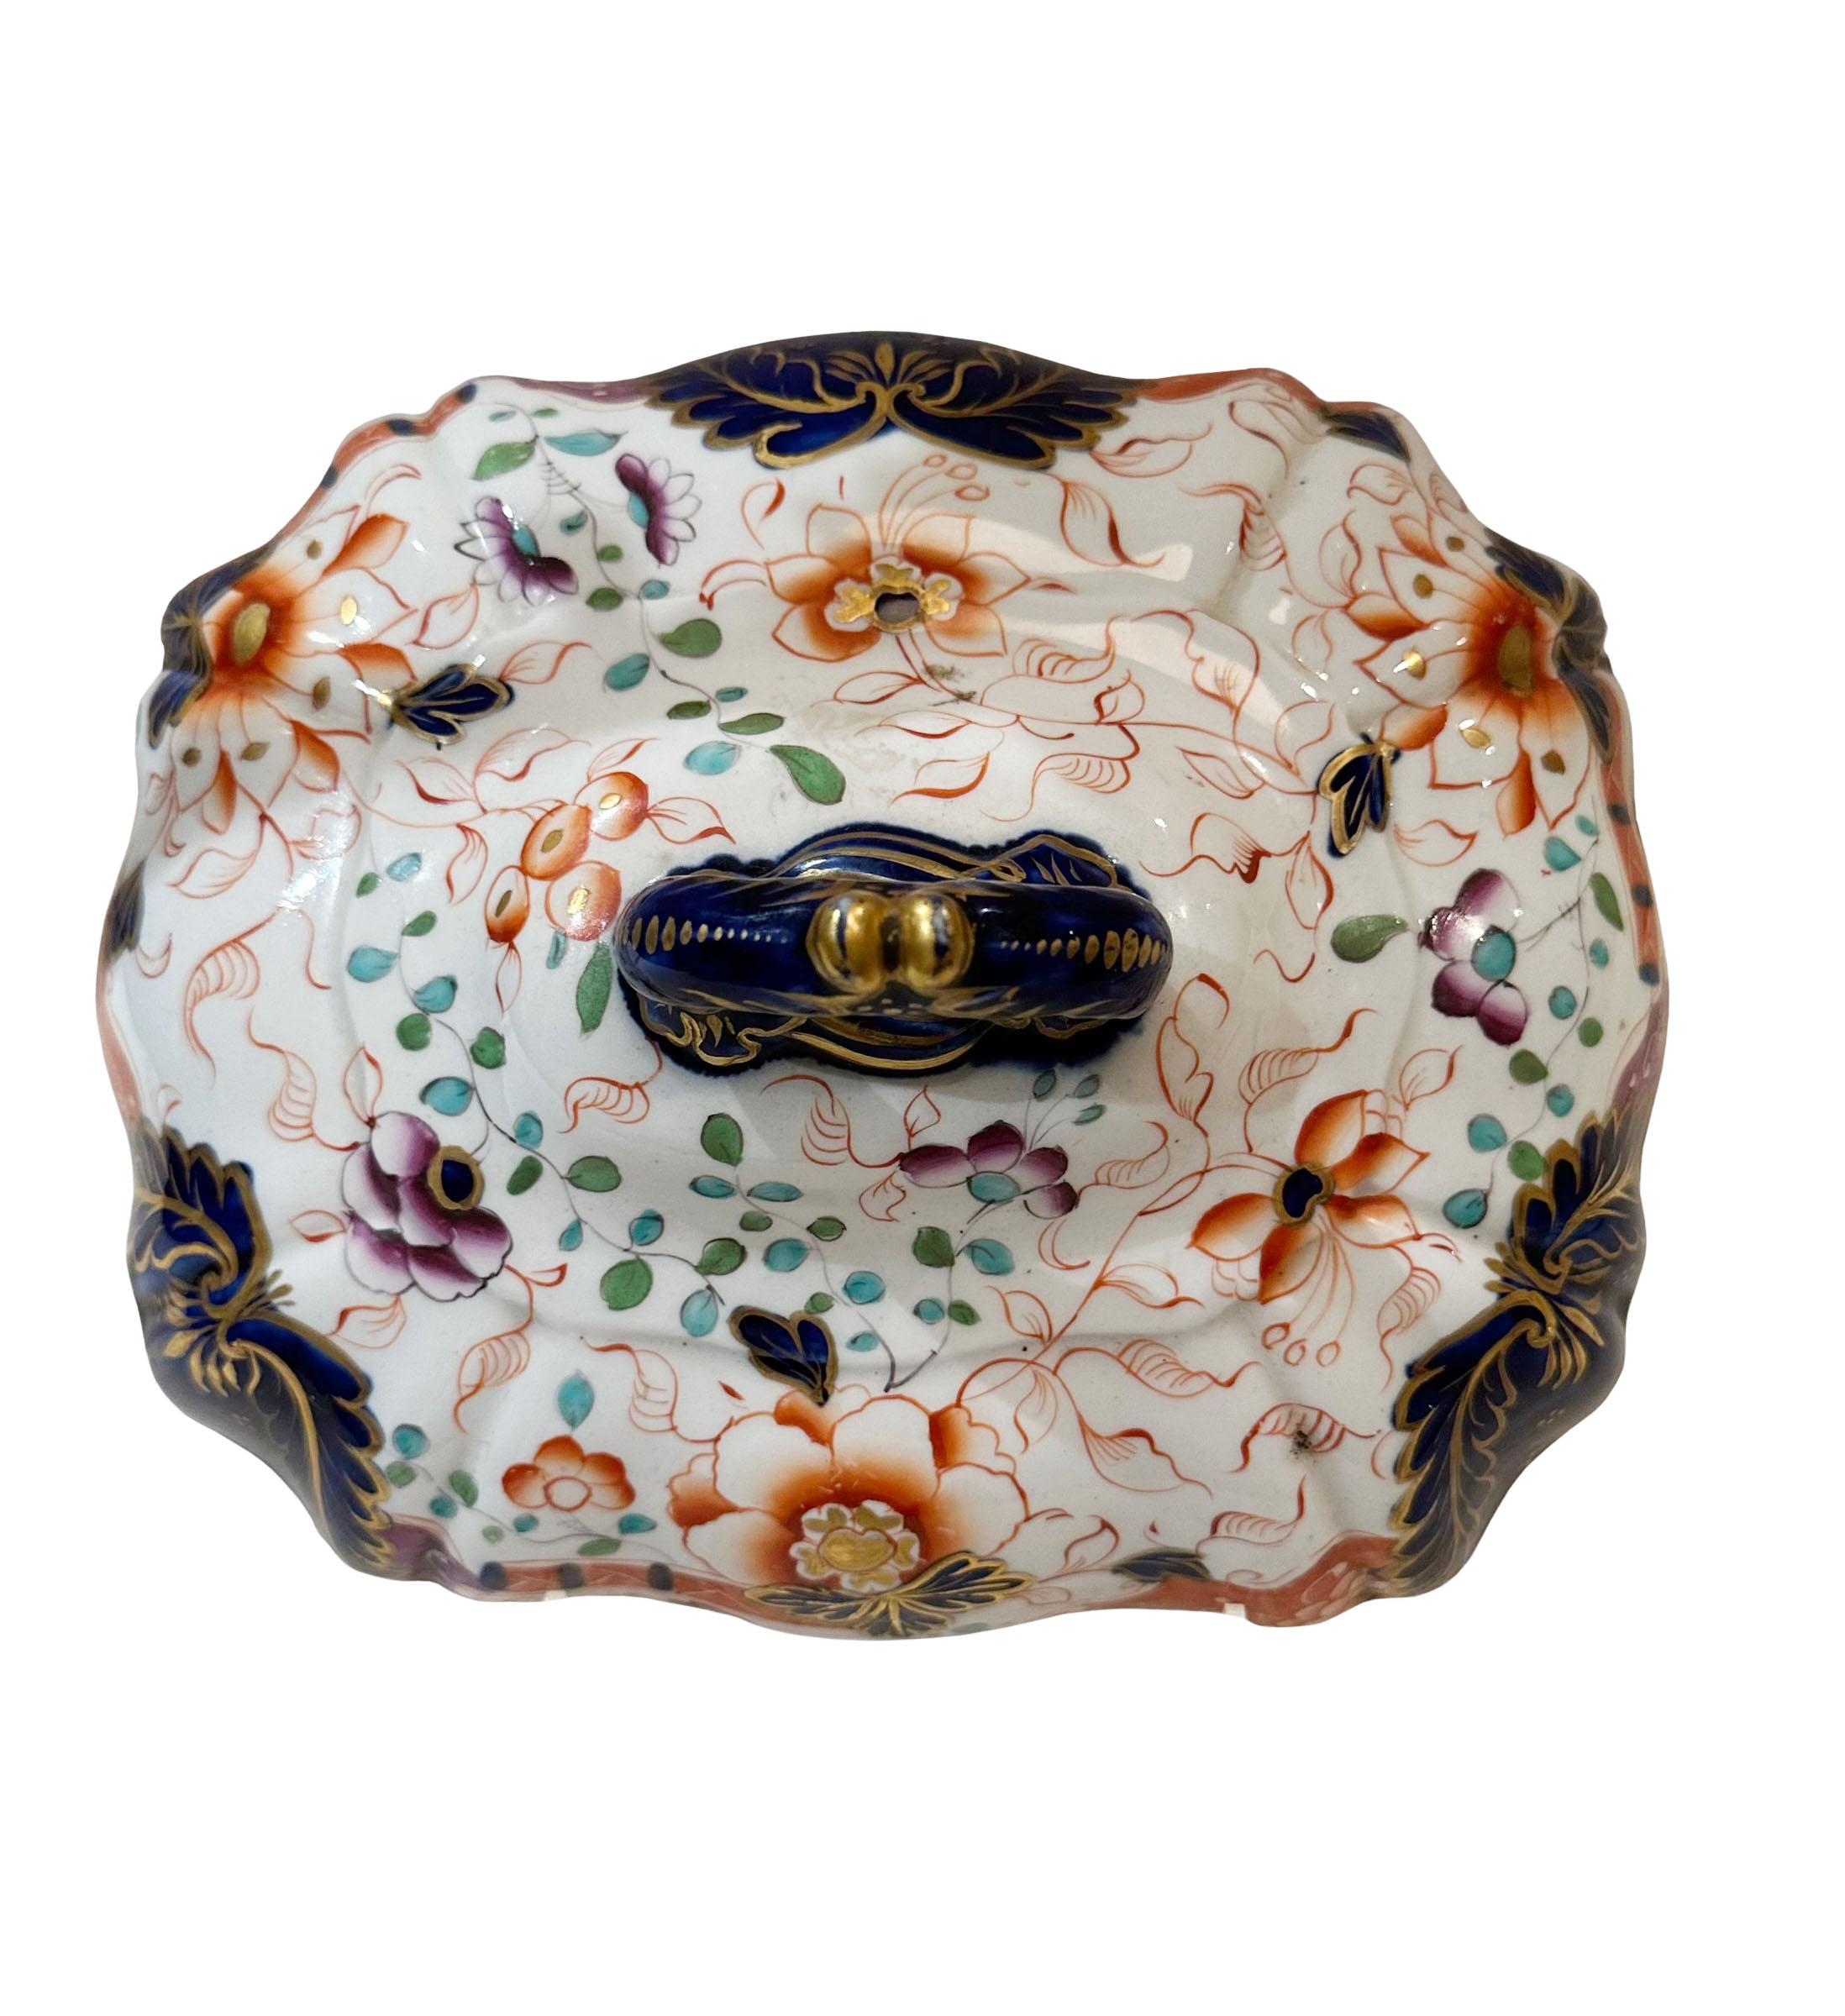 A Davenport ironstone covered vegetable tureen with lid in the Imari pattern. Early 19th century, England.